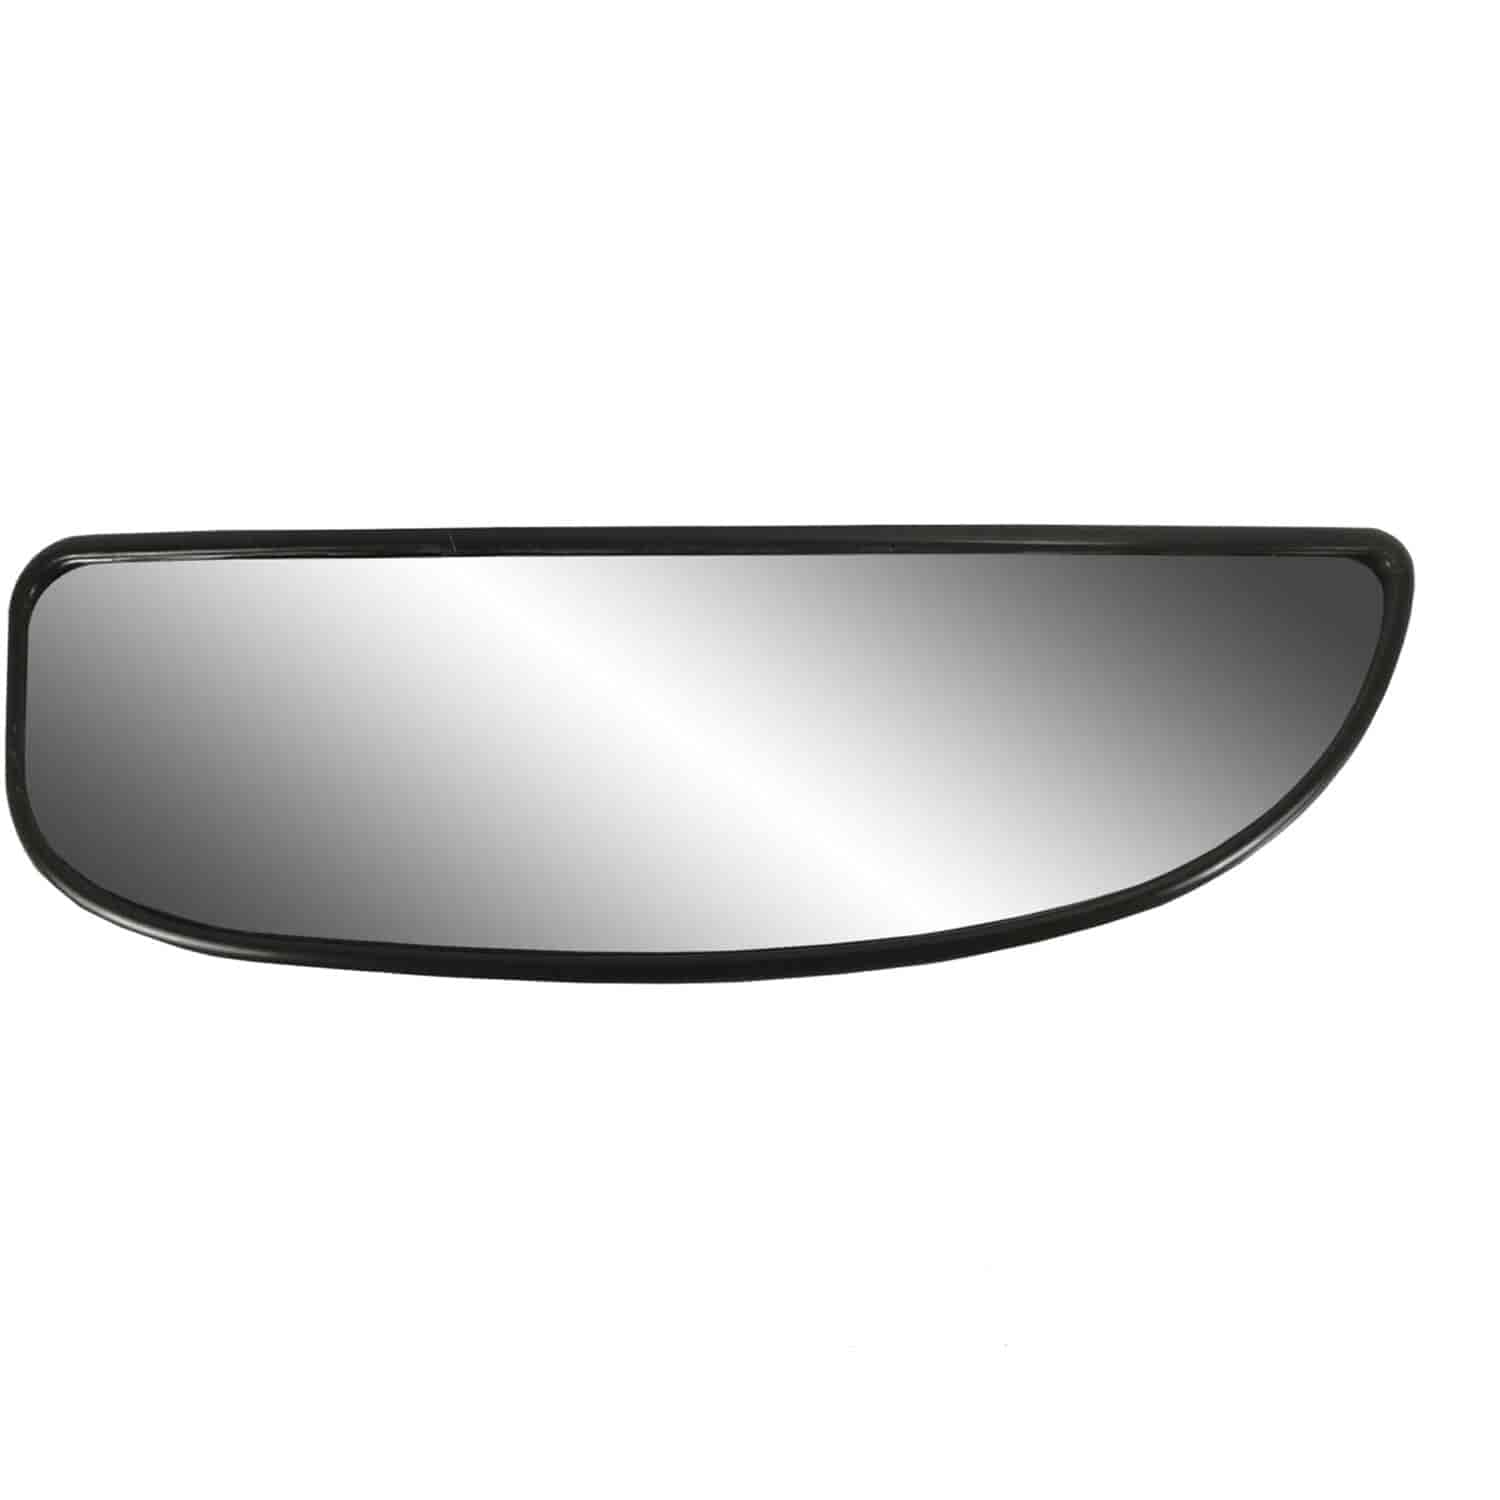 Replacement Glass Assembly for 00-05 Excursion towing mirror